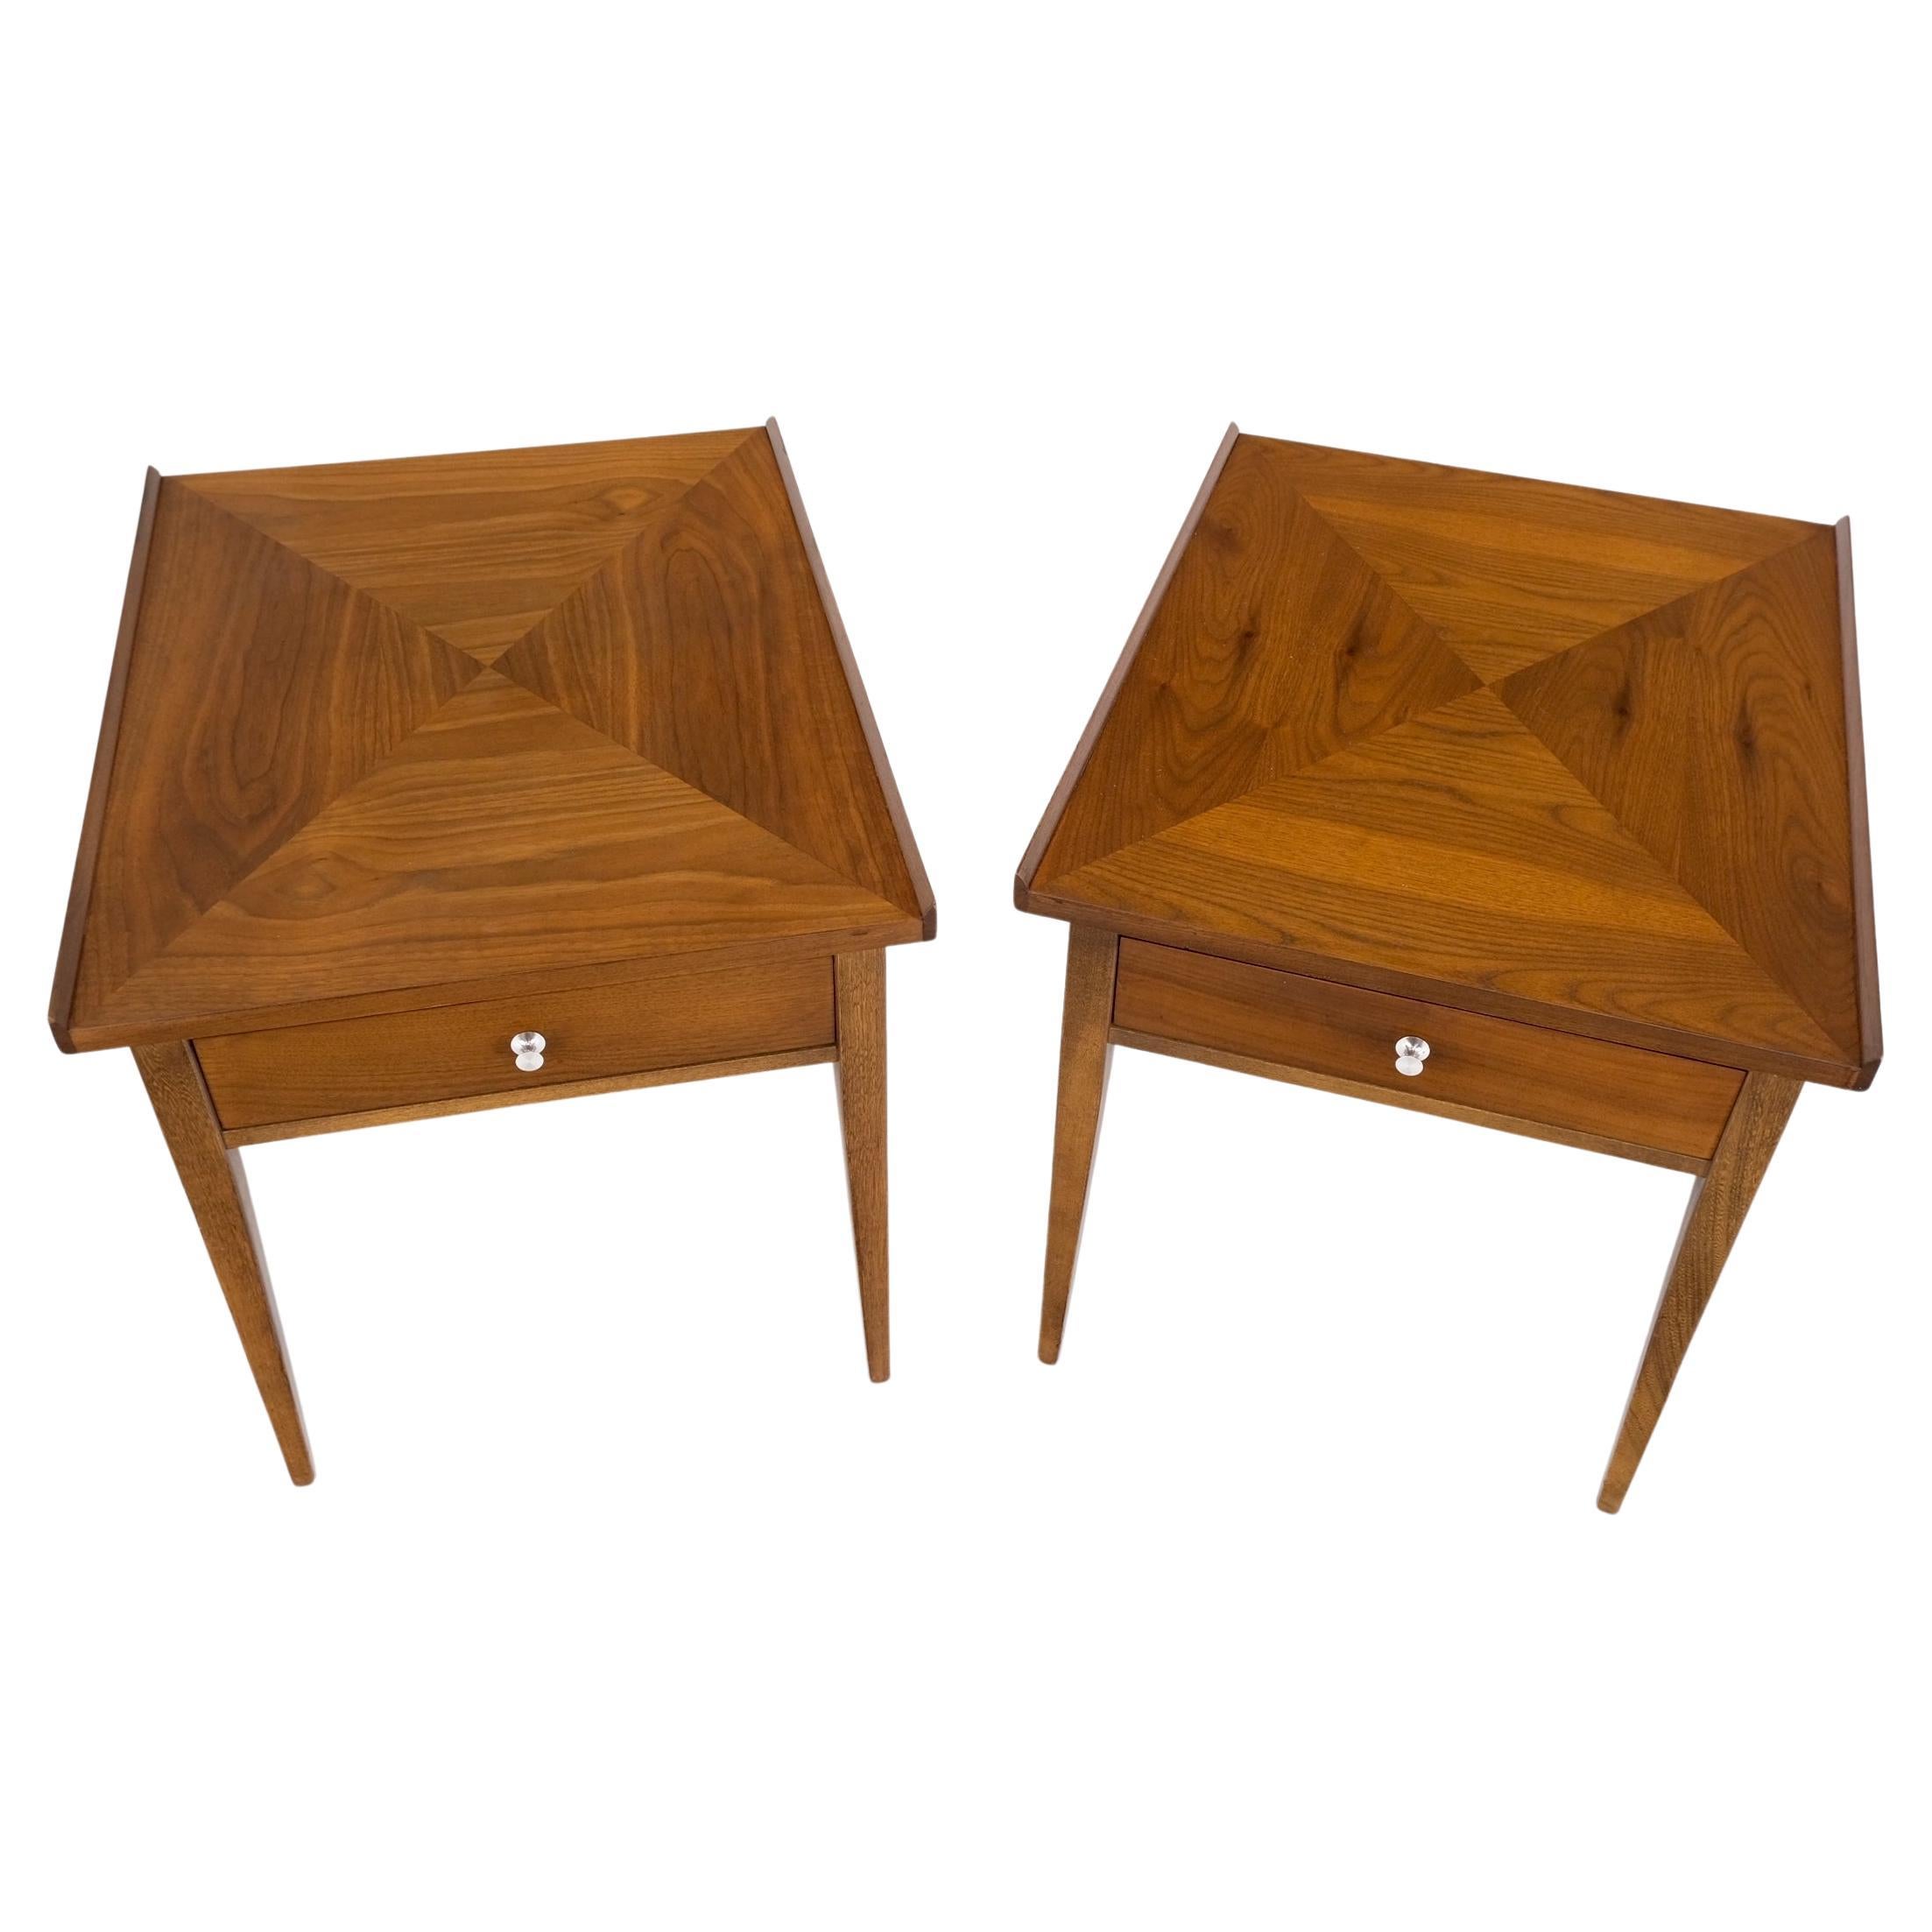 Pair of walnut rolled edges square one drawer tapered legs end side tables night stands.